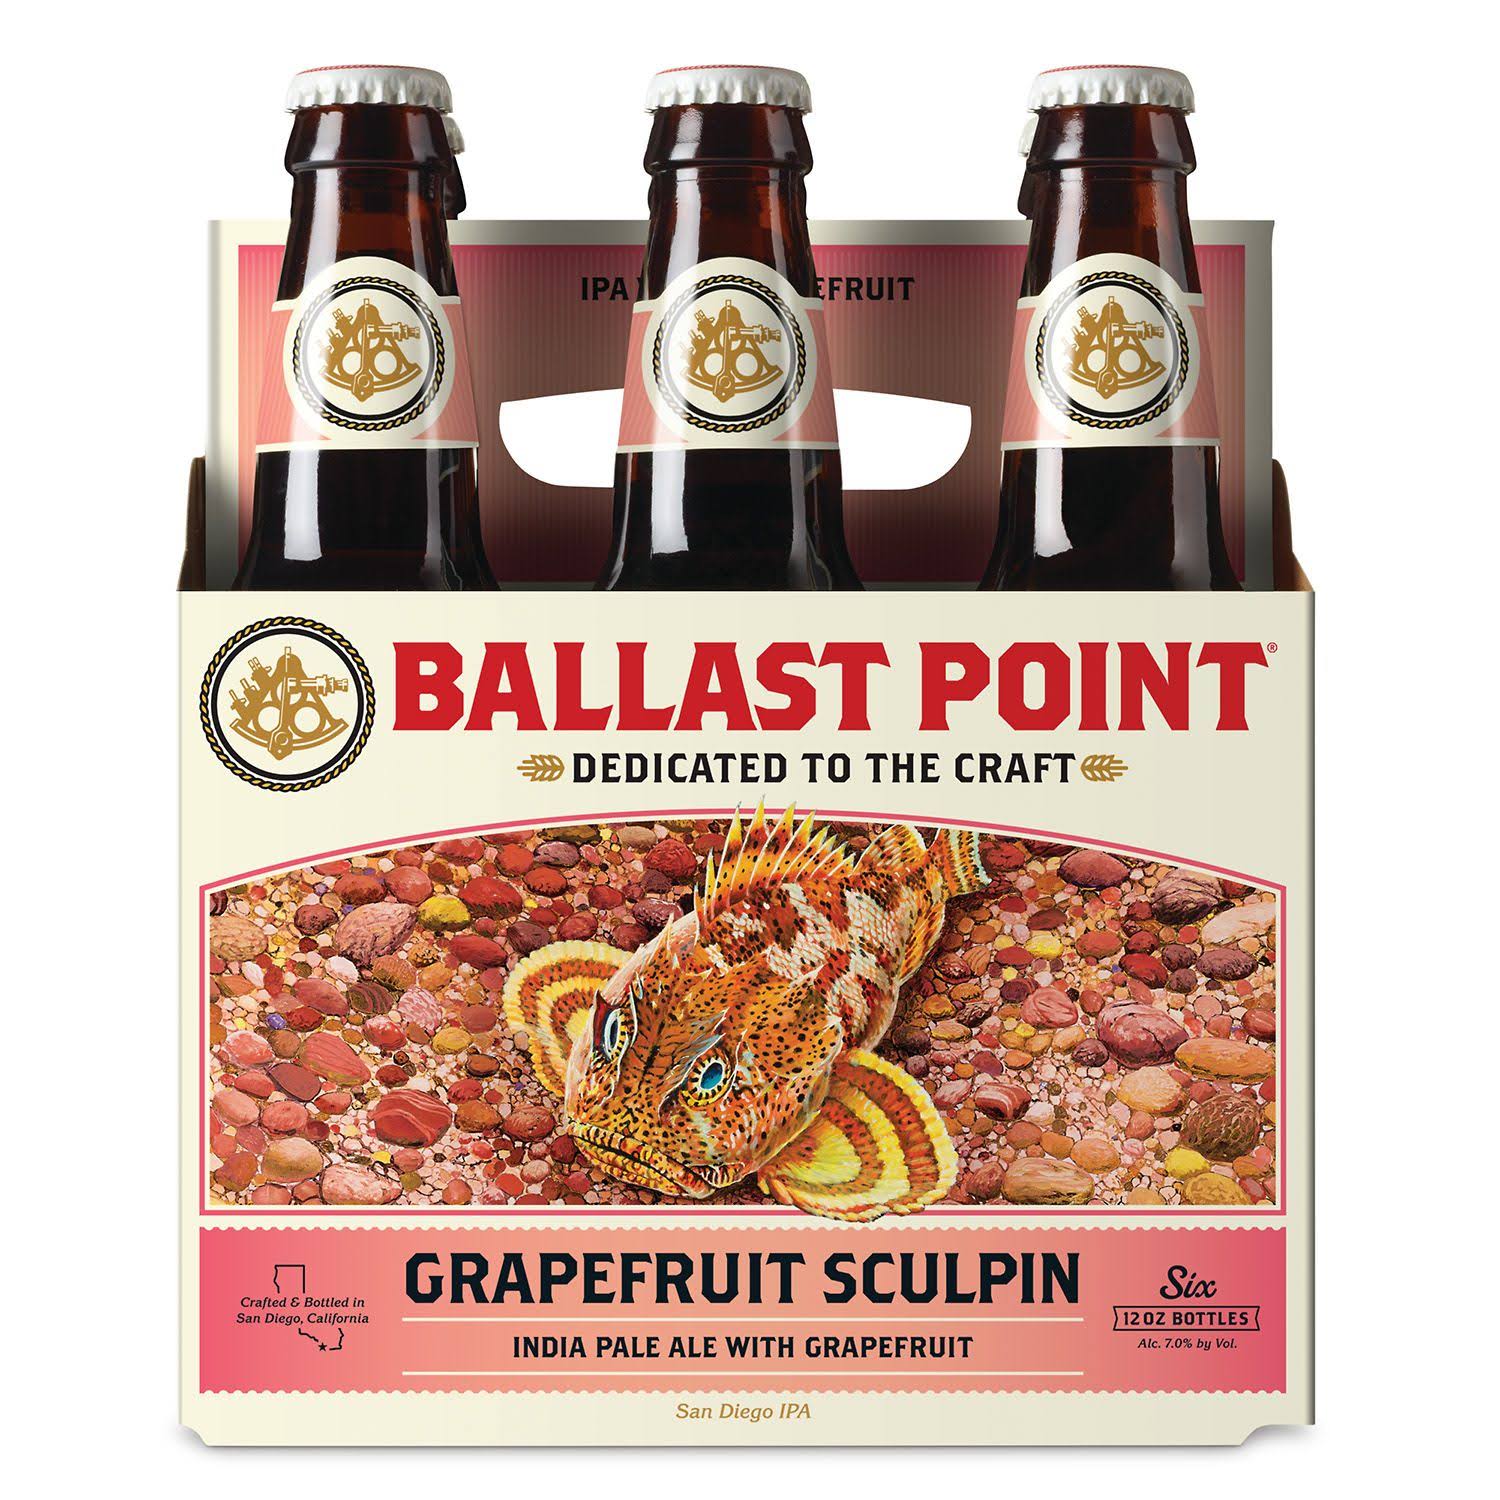 Ballast Point Beer, India Pale Ale, Grapefruit Sculpin - 6 pack, 12 oz bottles